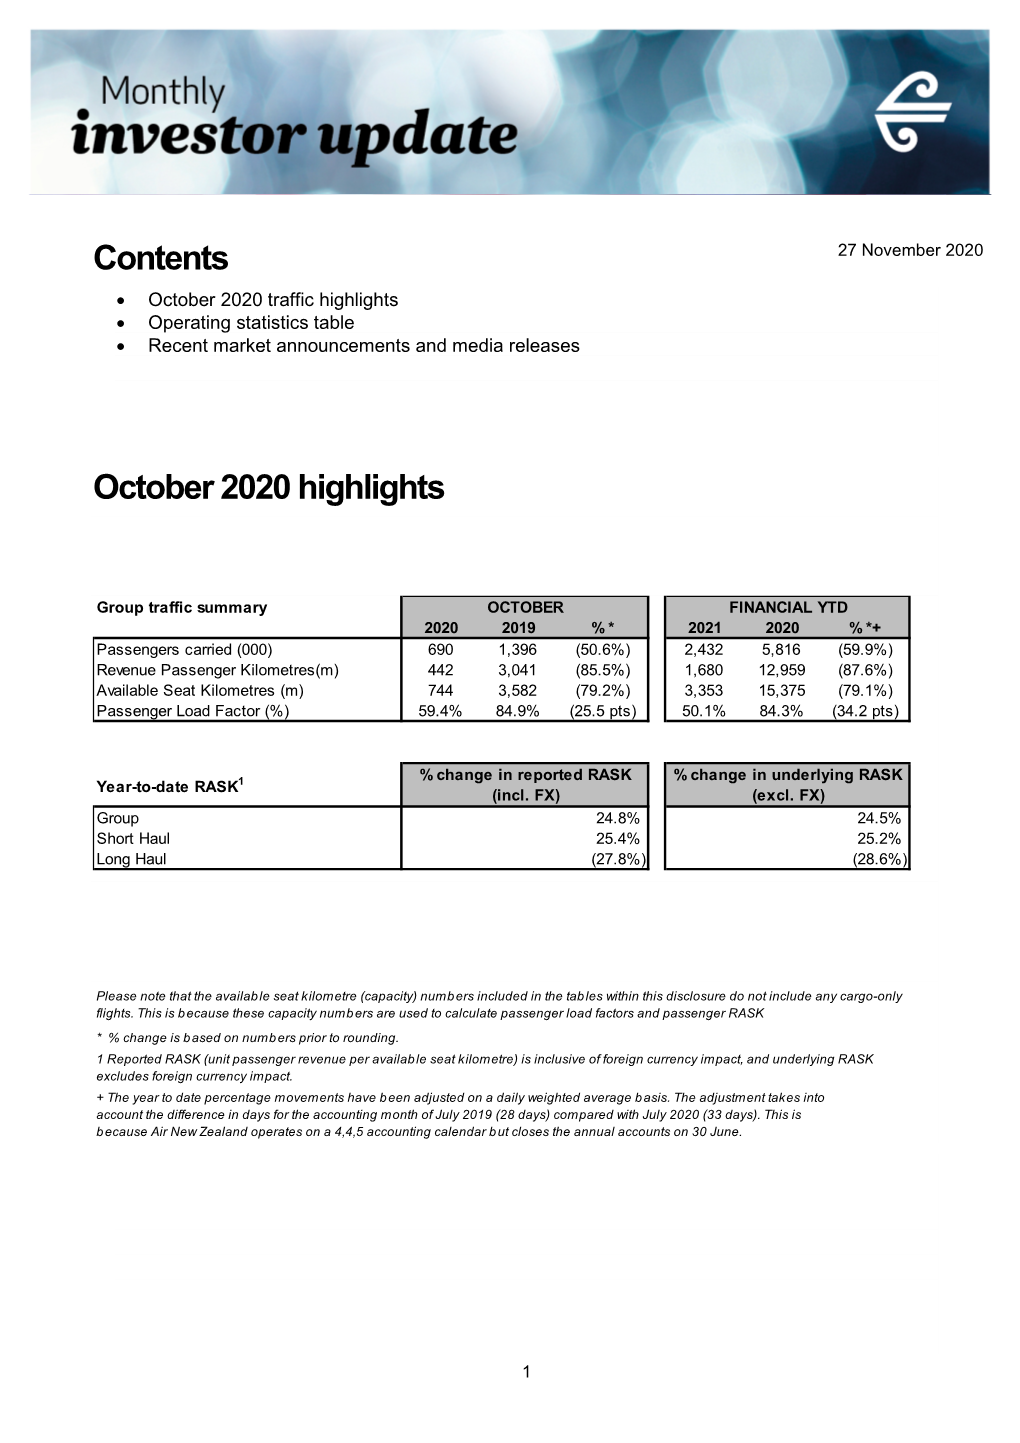 Contents October 2020 Highlights